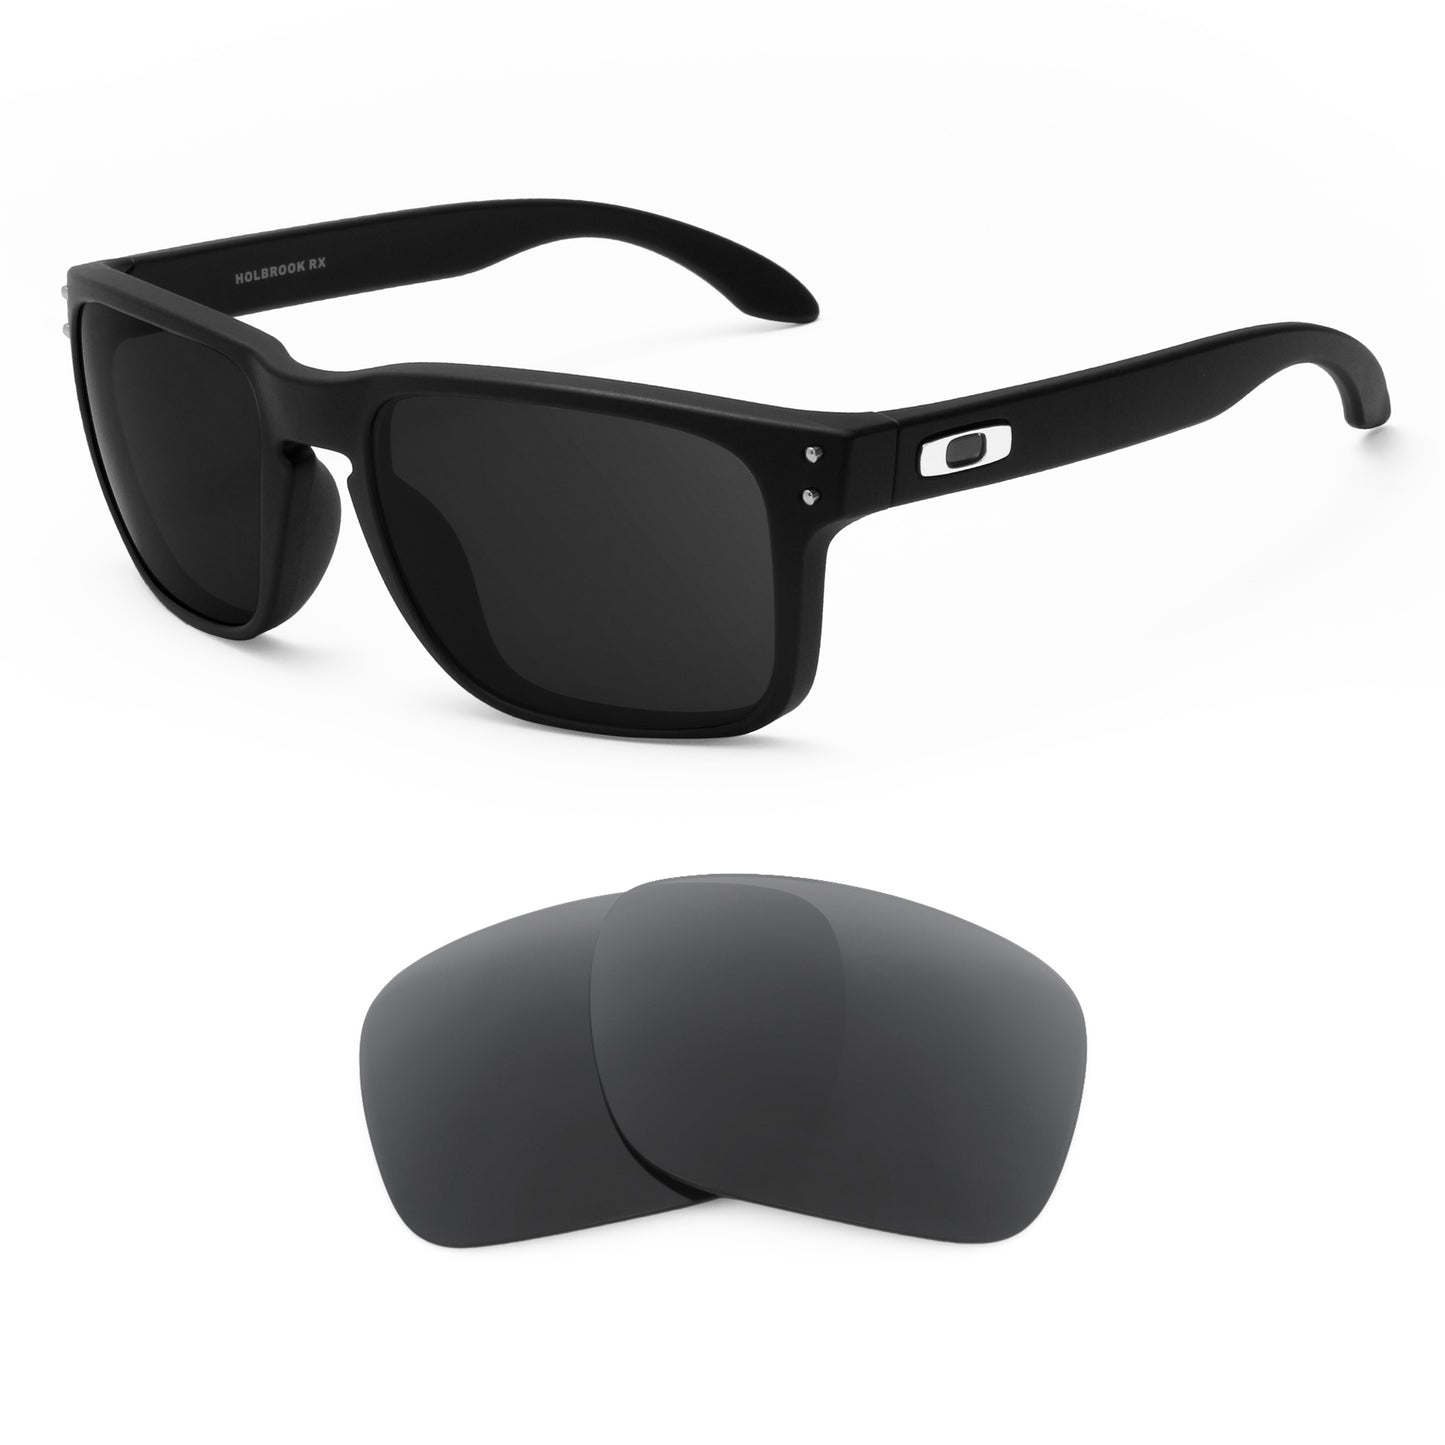 Oakley Holbrook Rx 54 sunglasses with replacement lenses